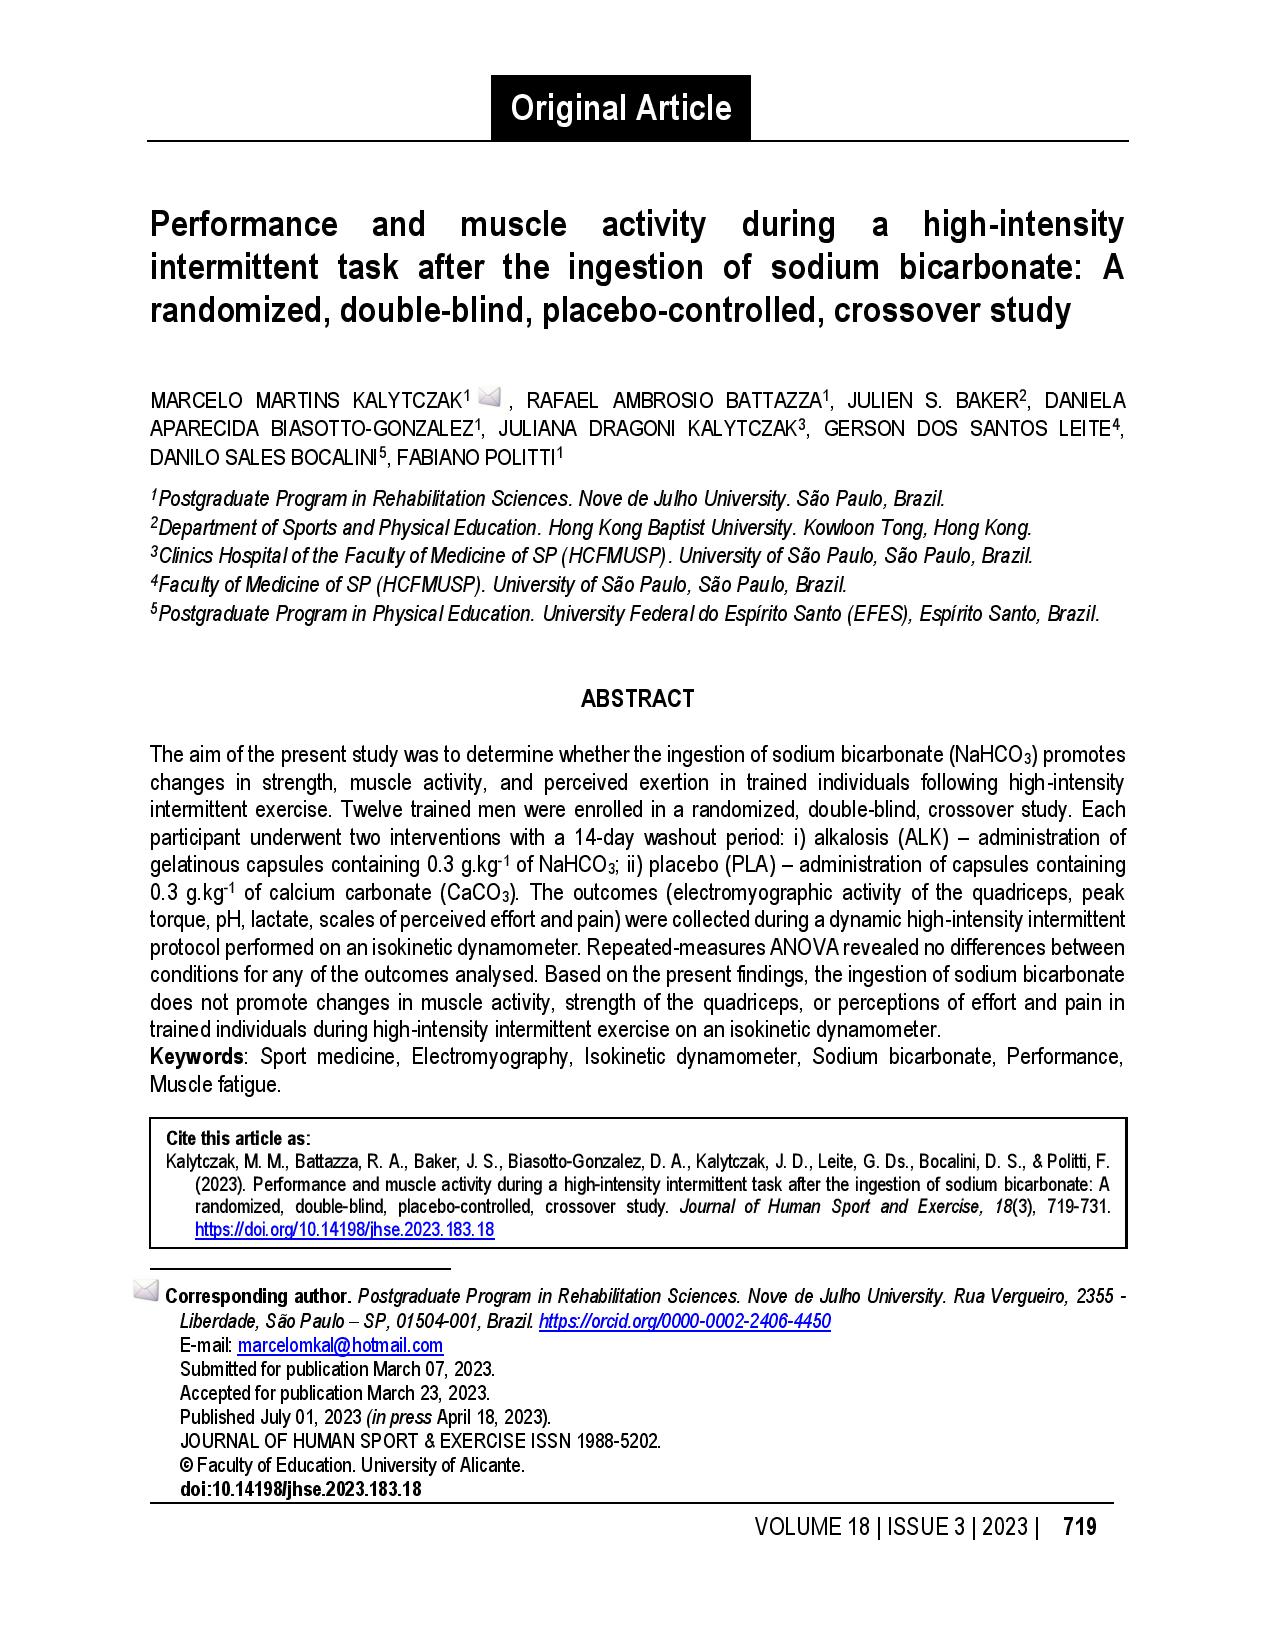 Performance and muscle activity during a high-intensity intermittent task after the ingestion of sodium bicarbonate: A randomized, double-blind, placebo-controlled, crossover study